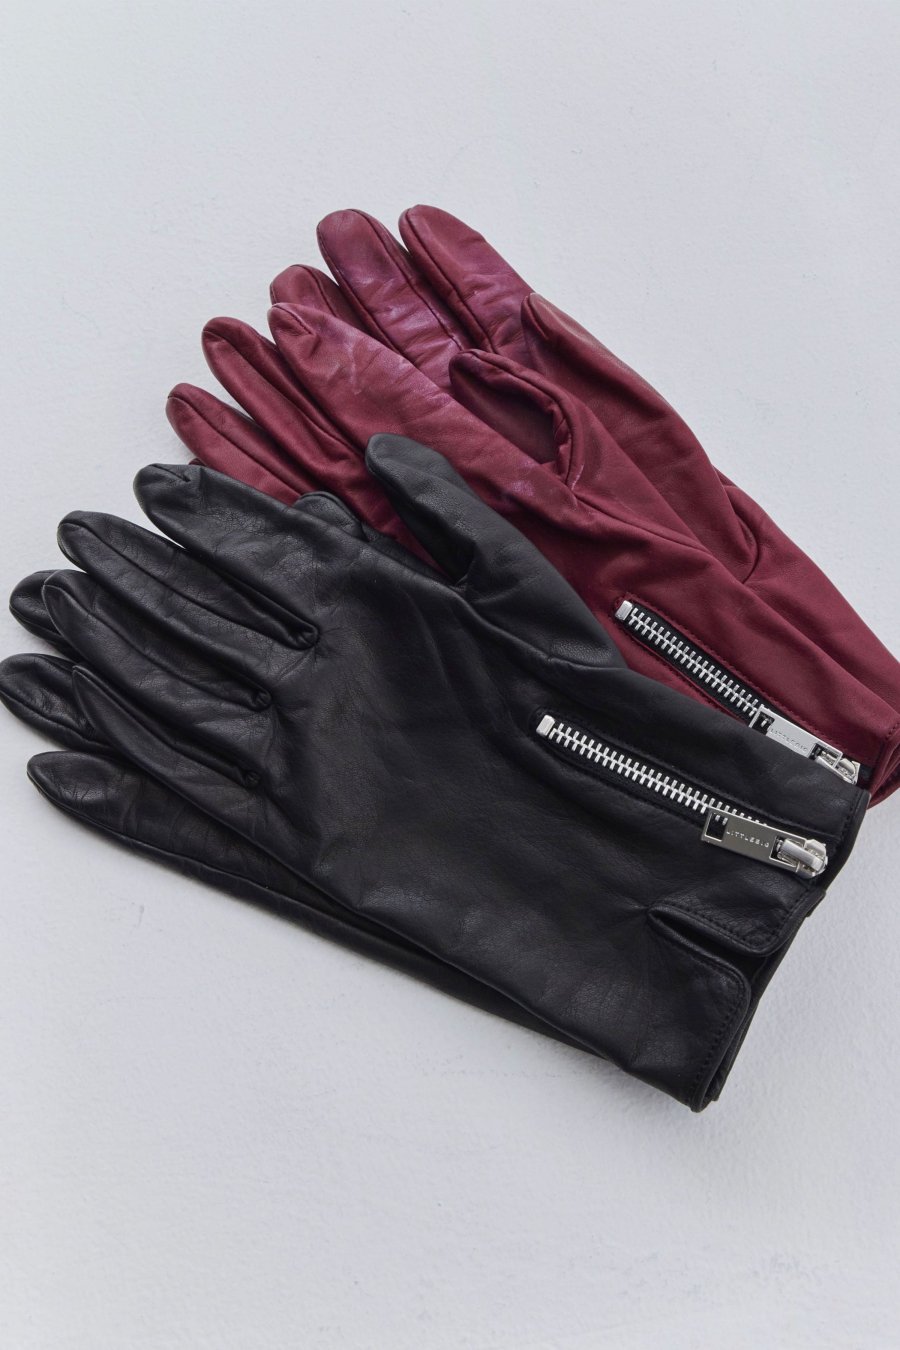 LITTLEBIG  22AW Leather Glove(Black or Bordeaux)<img class='new_mark_img2' src='https://img.shop-pro.jp/img/new/icons15.gif' style='border:none;display:inline;margin:0px;padding:0px;width:auto;' />